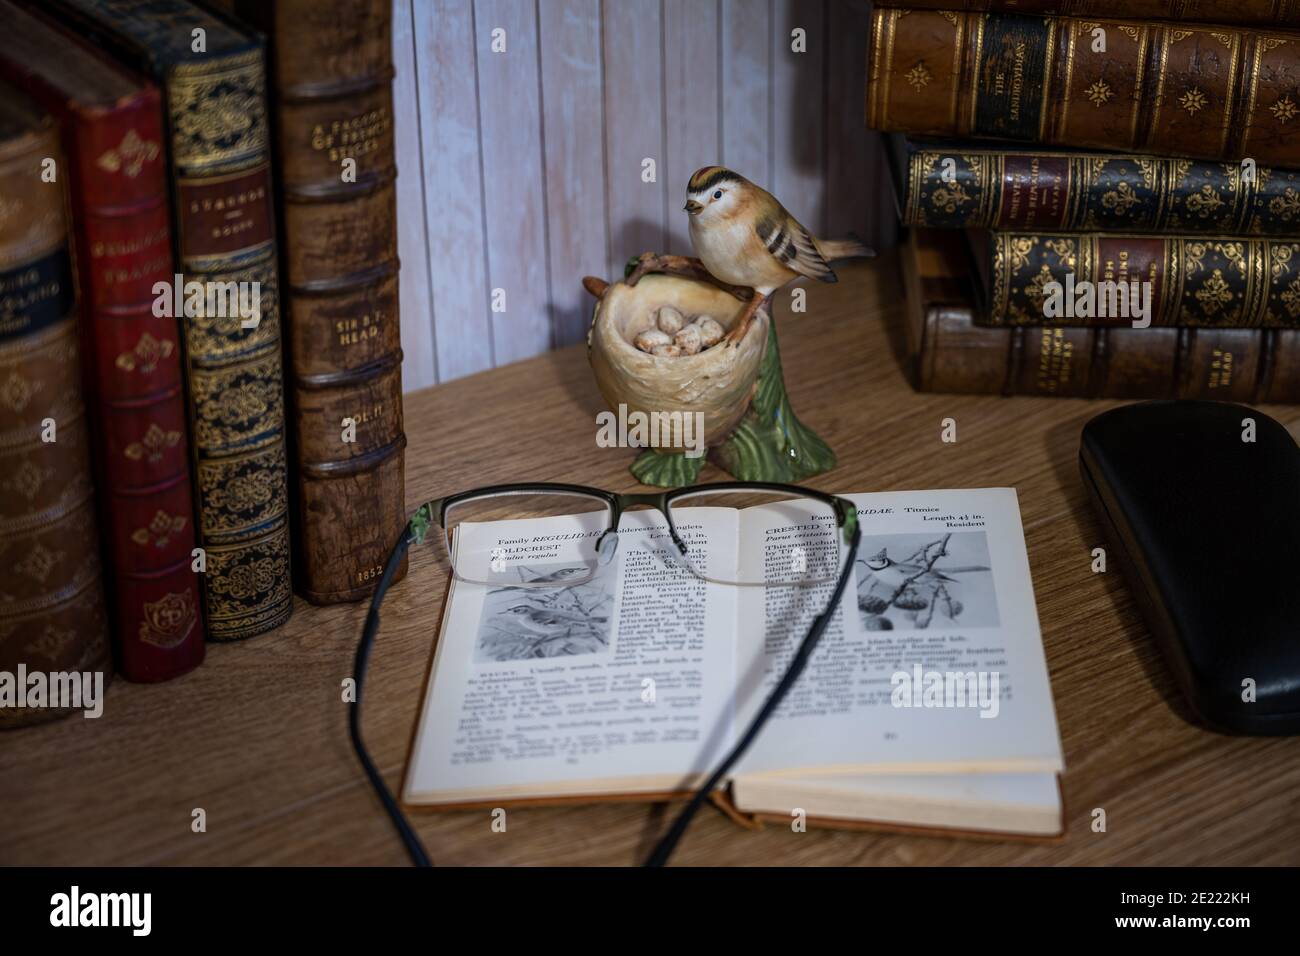 Classical still life scene of leather bound books, an open bird book, and glasses Stock Photo